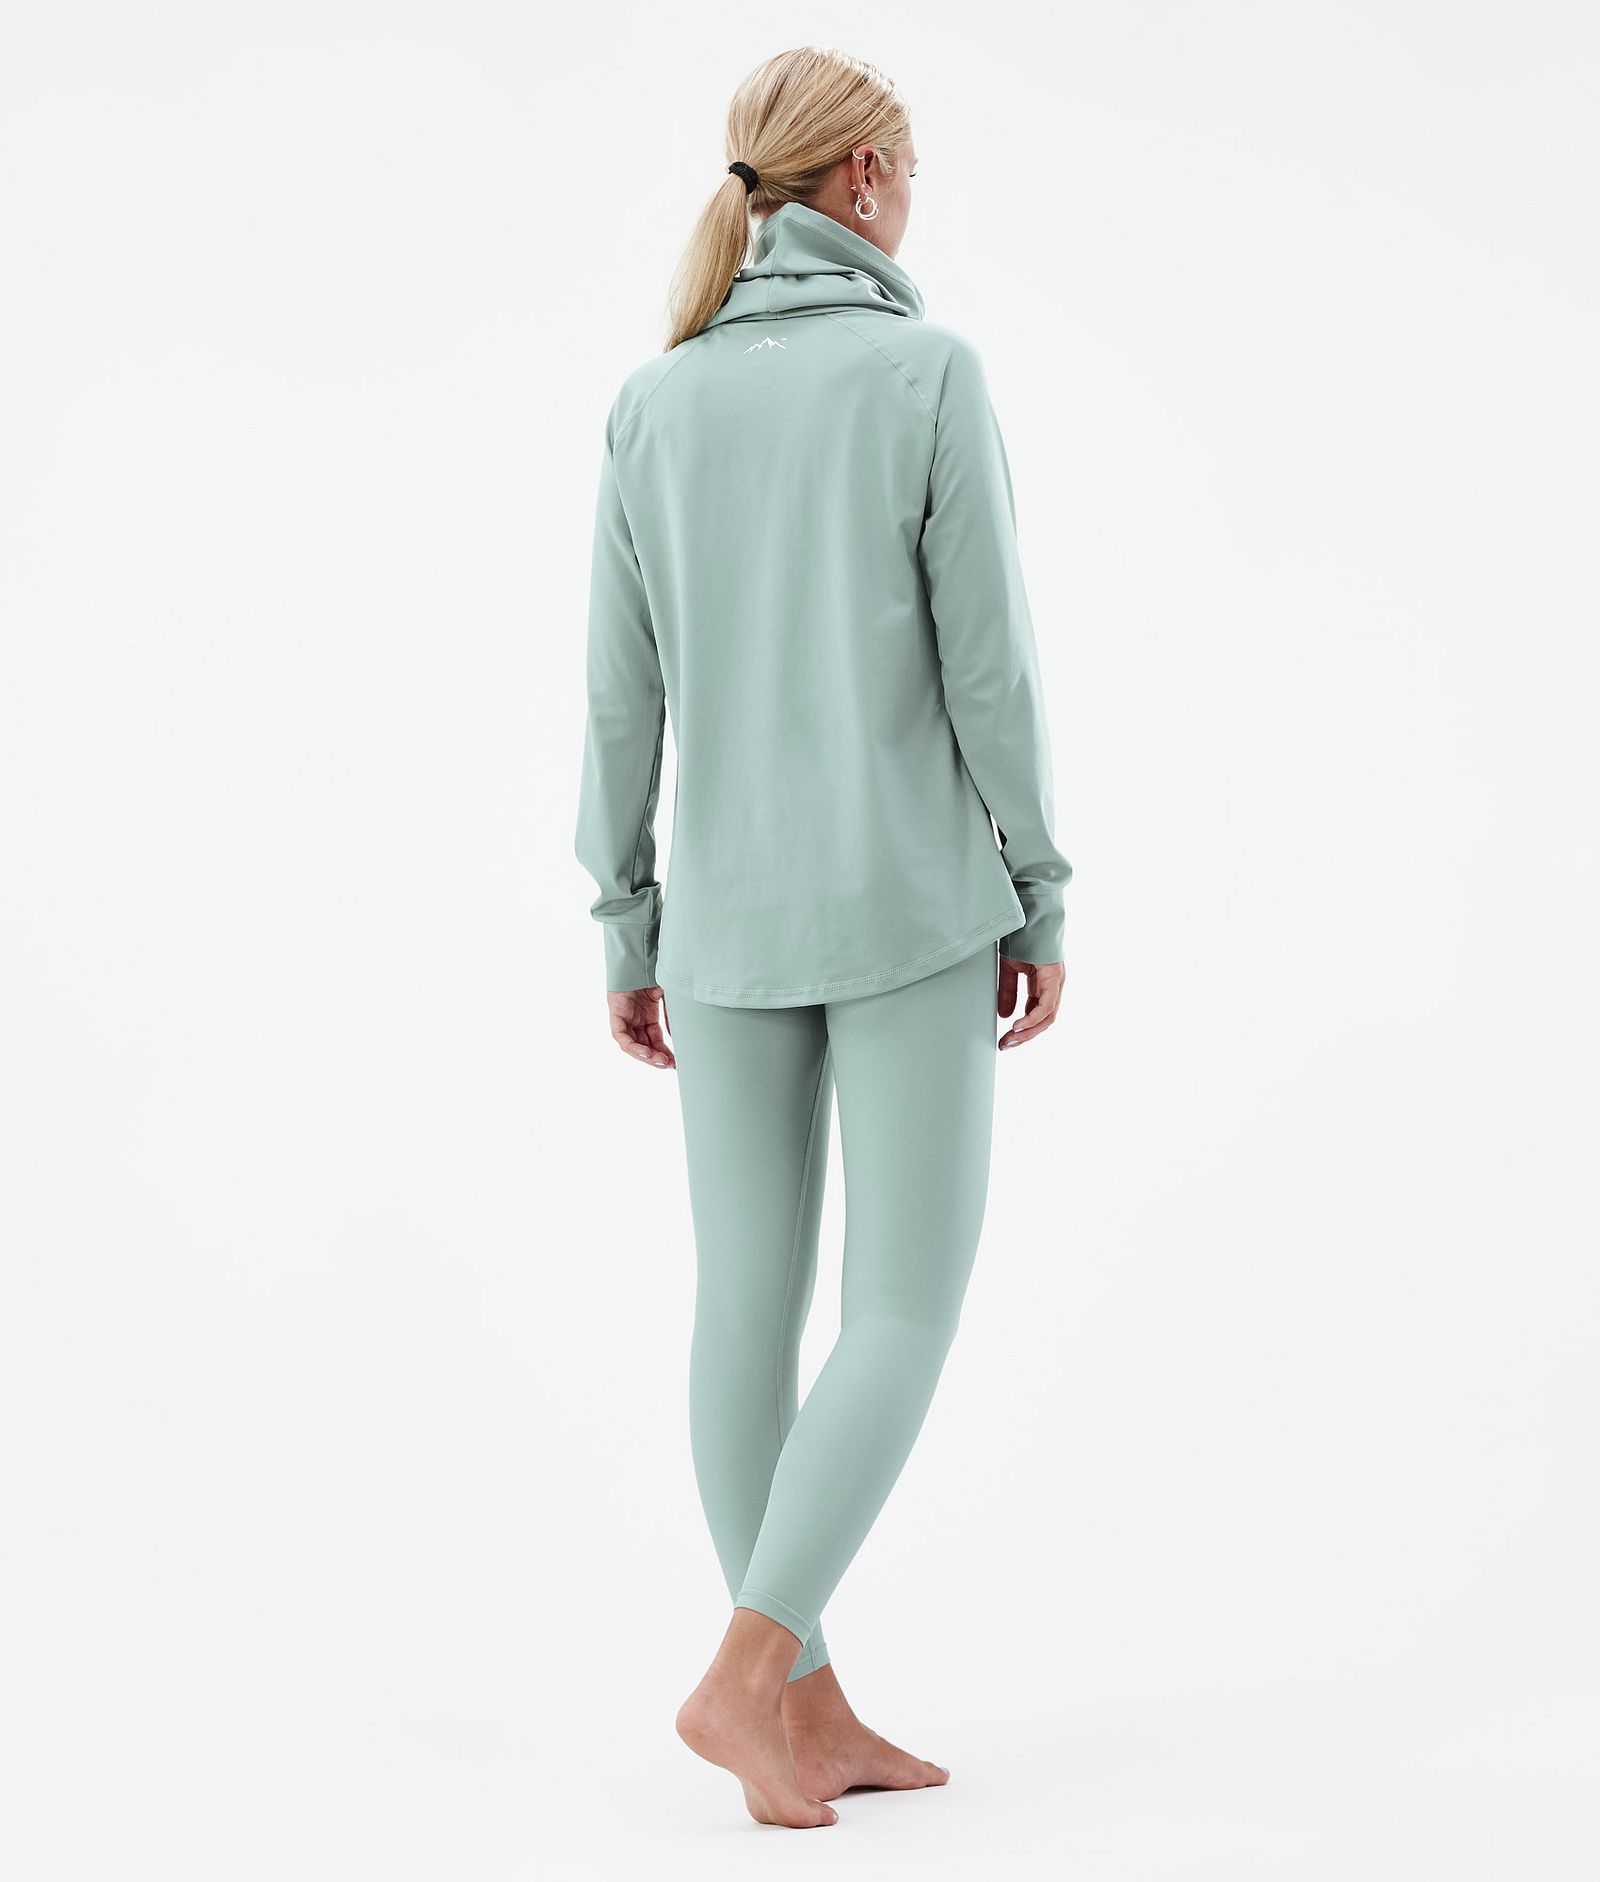 Dope Snuggle W 2022 Base Layer Top Women 2X-Up Faded Green